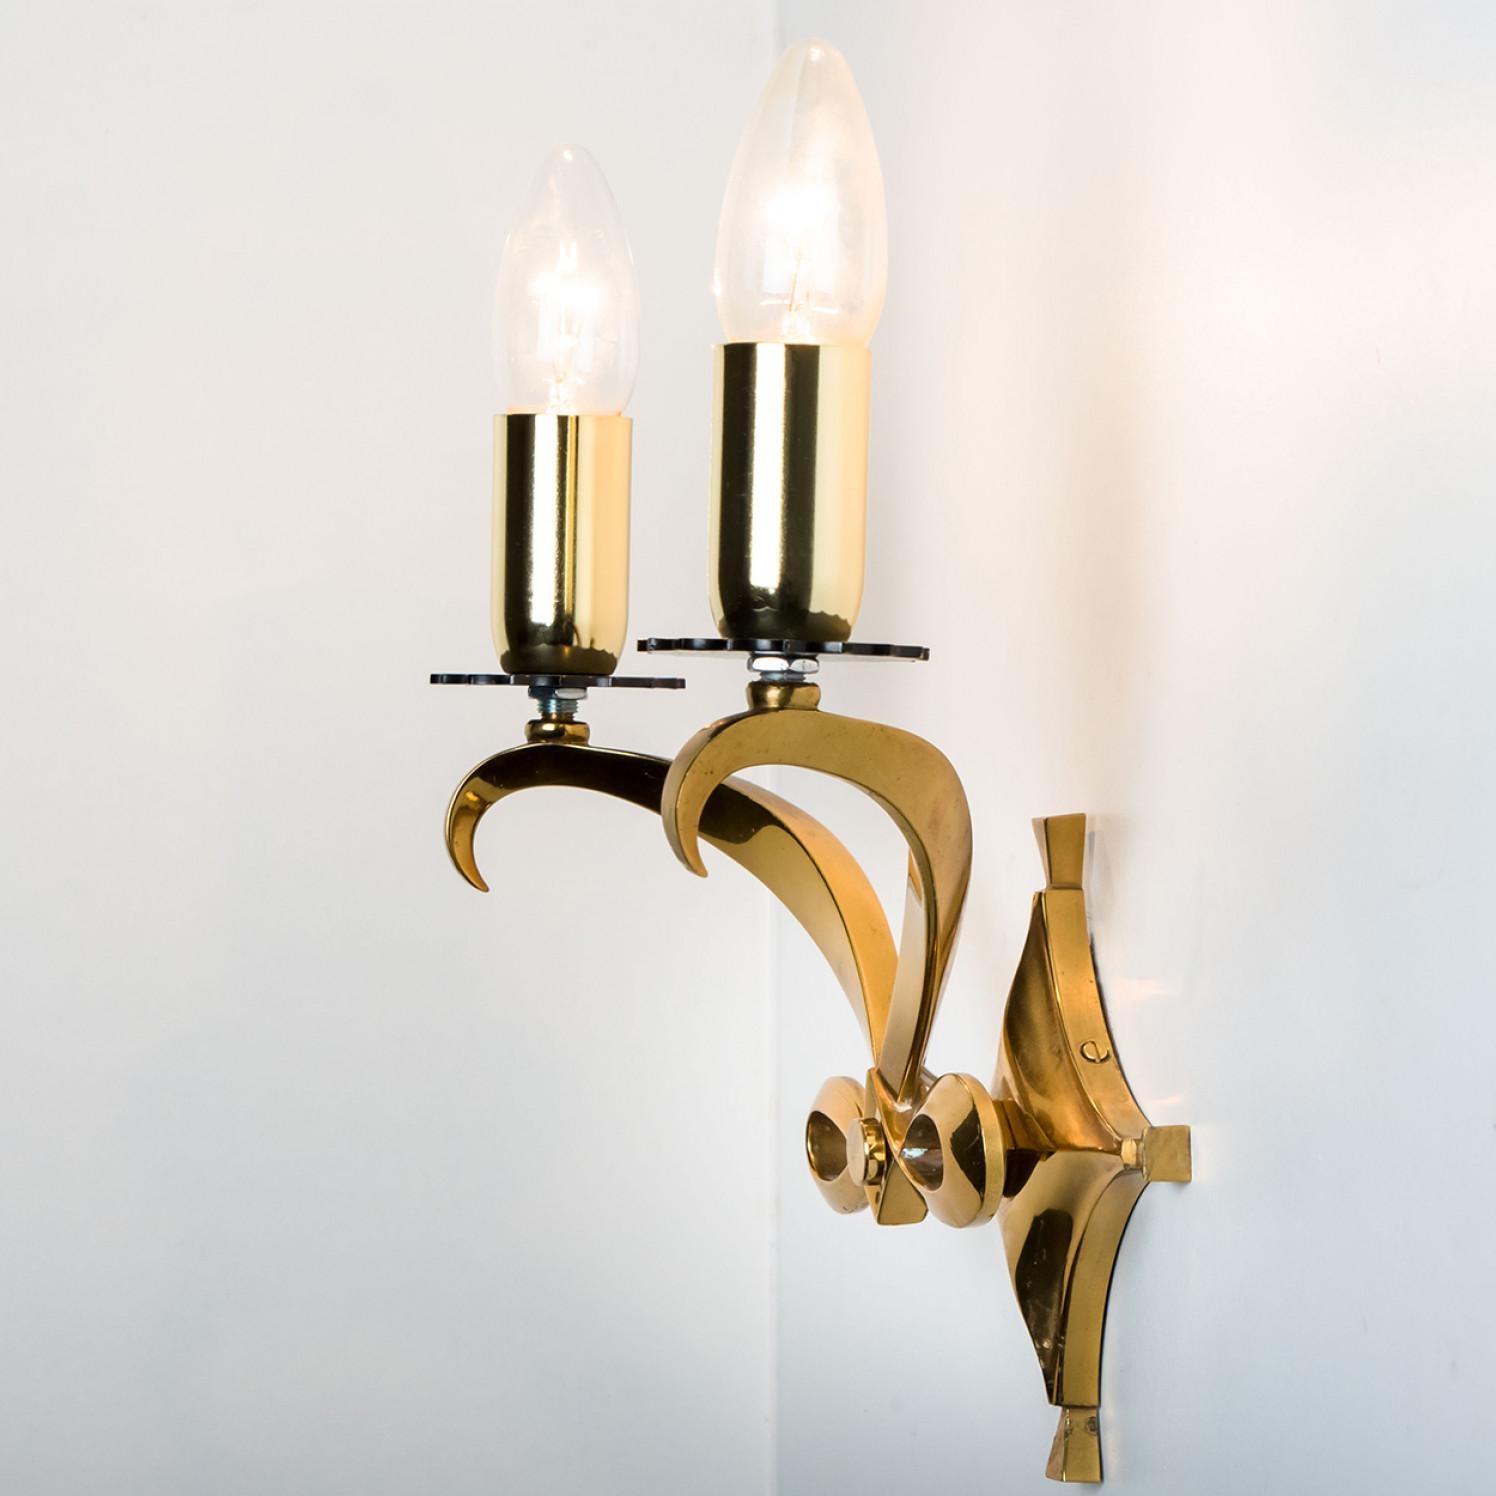 Pair of Brass Wall Sconces, Leleu, 1960 For Sale 8